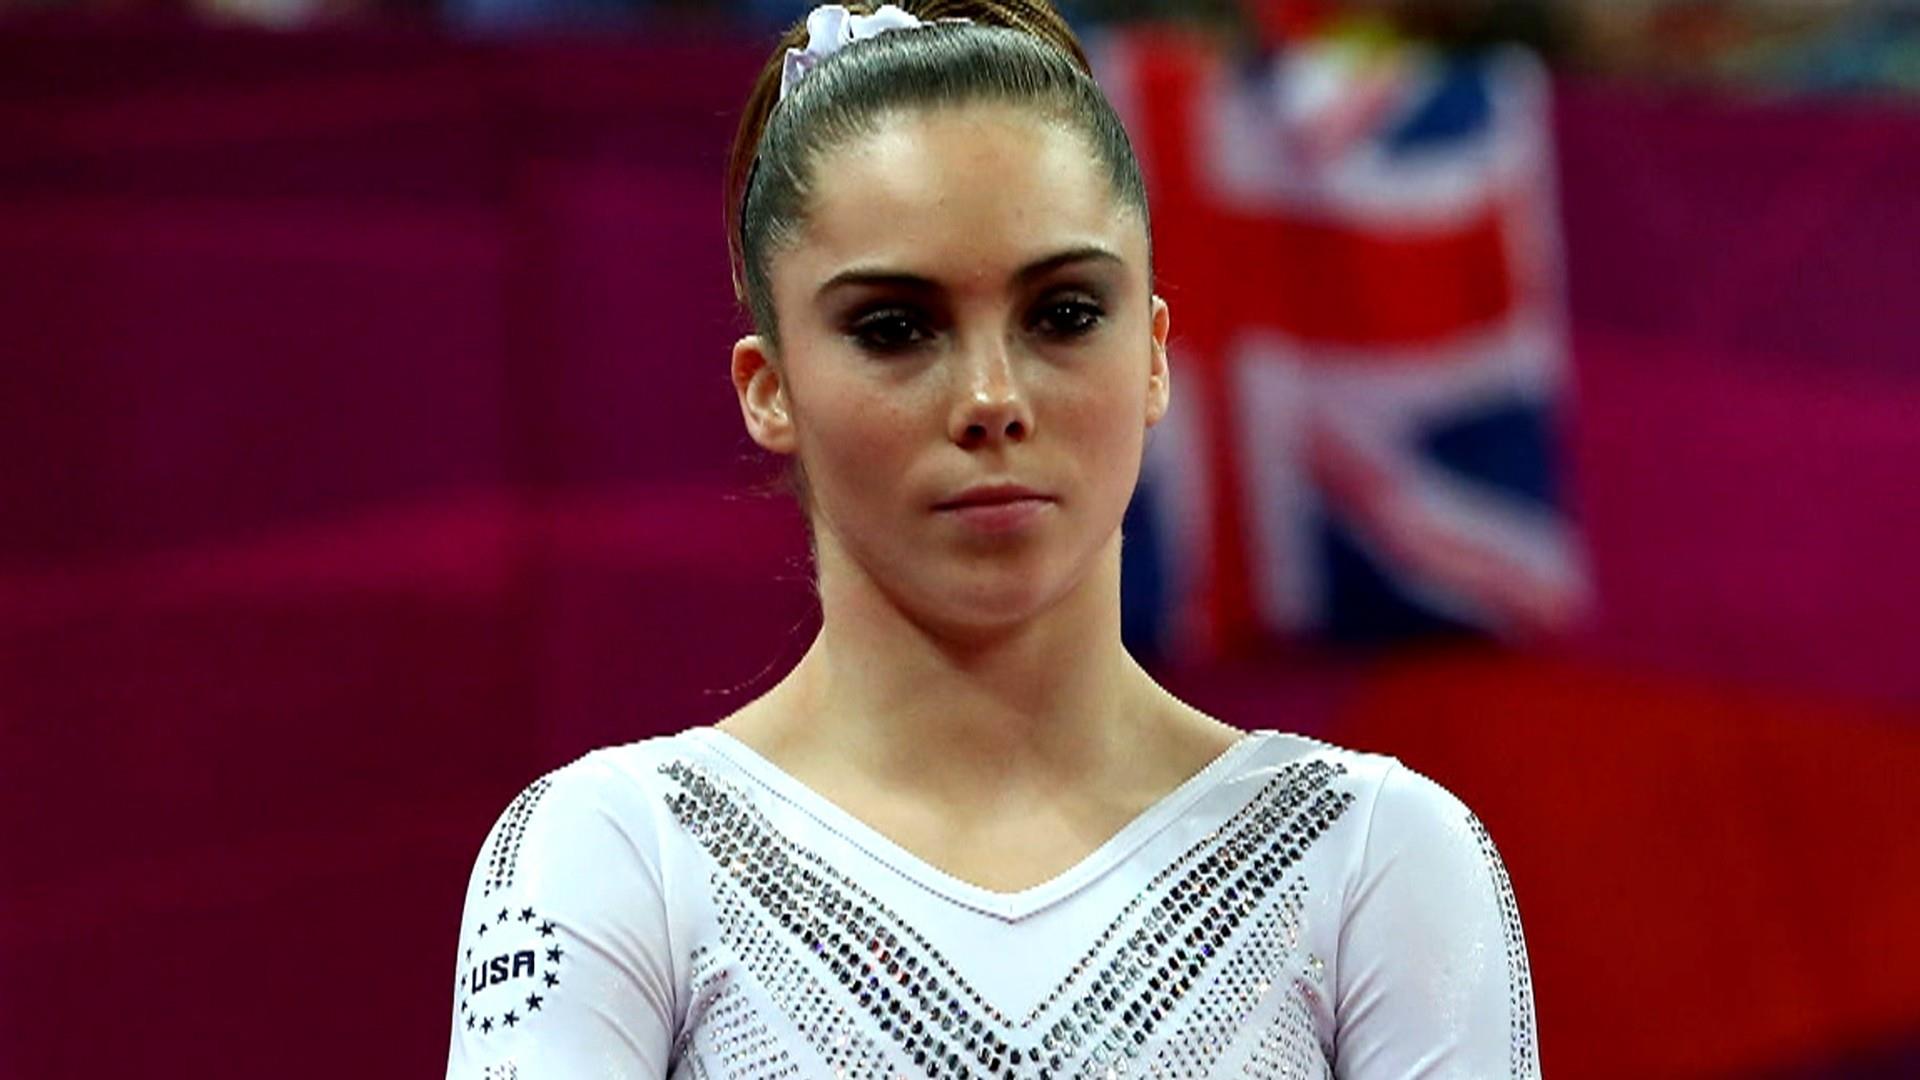 McKayla Maroney lawsuit alleges she was paid to keep silent about sexual ab...